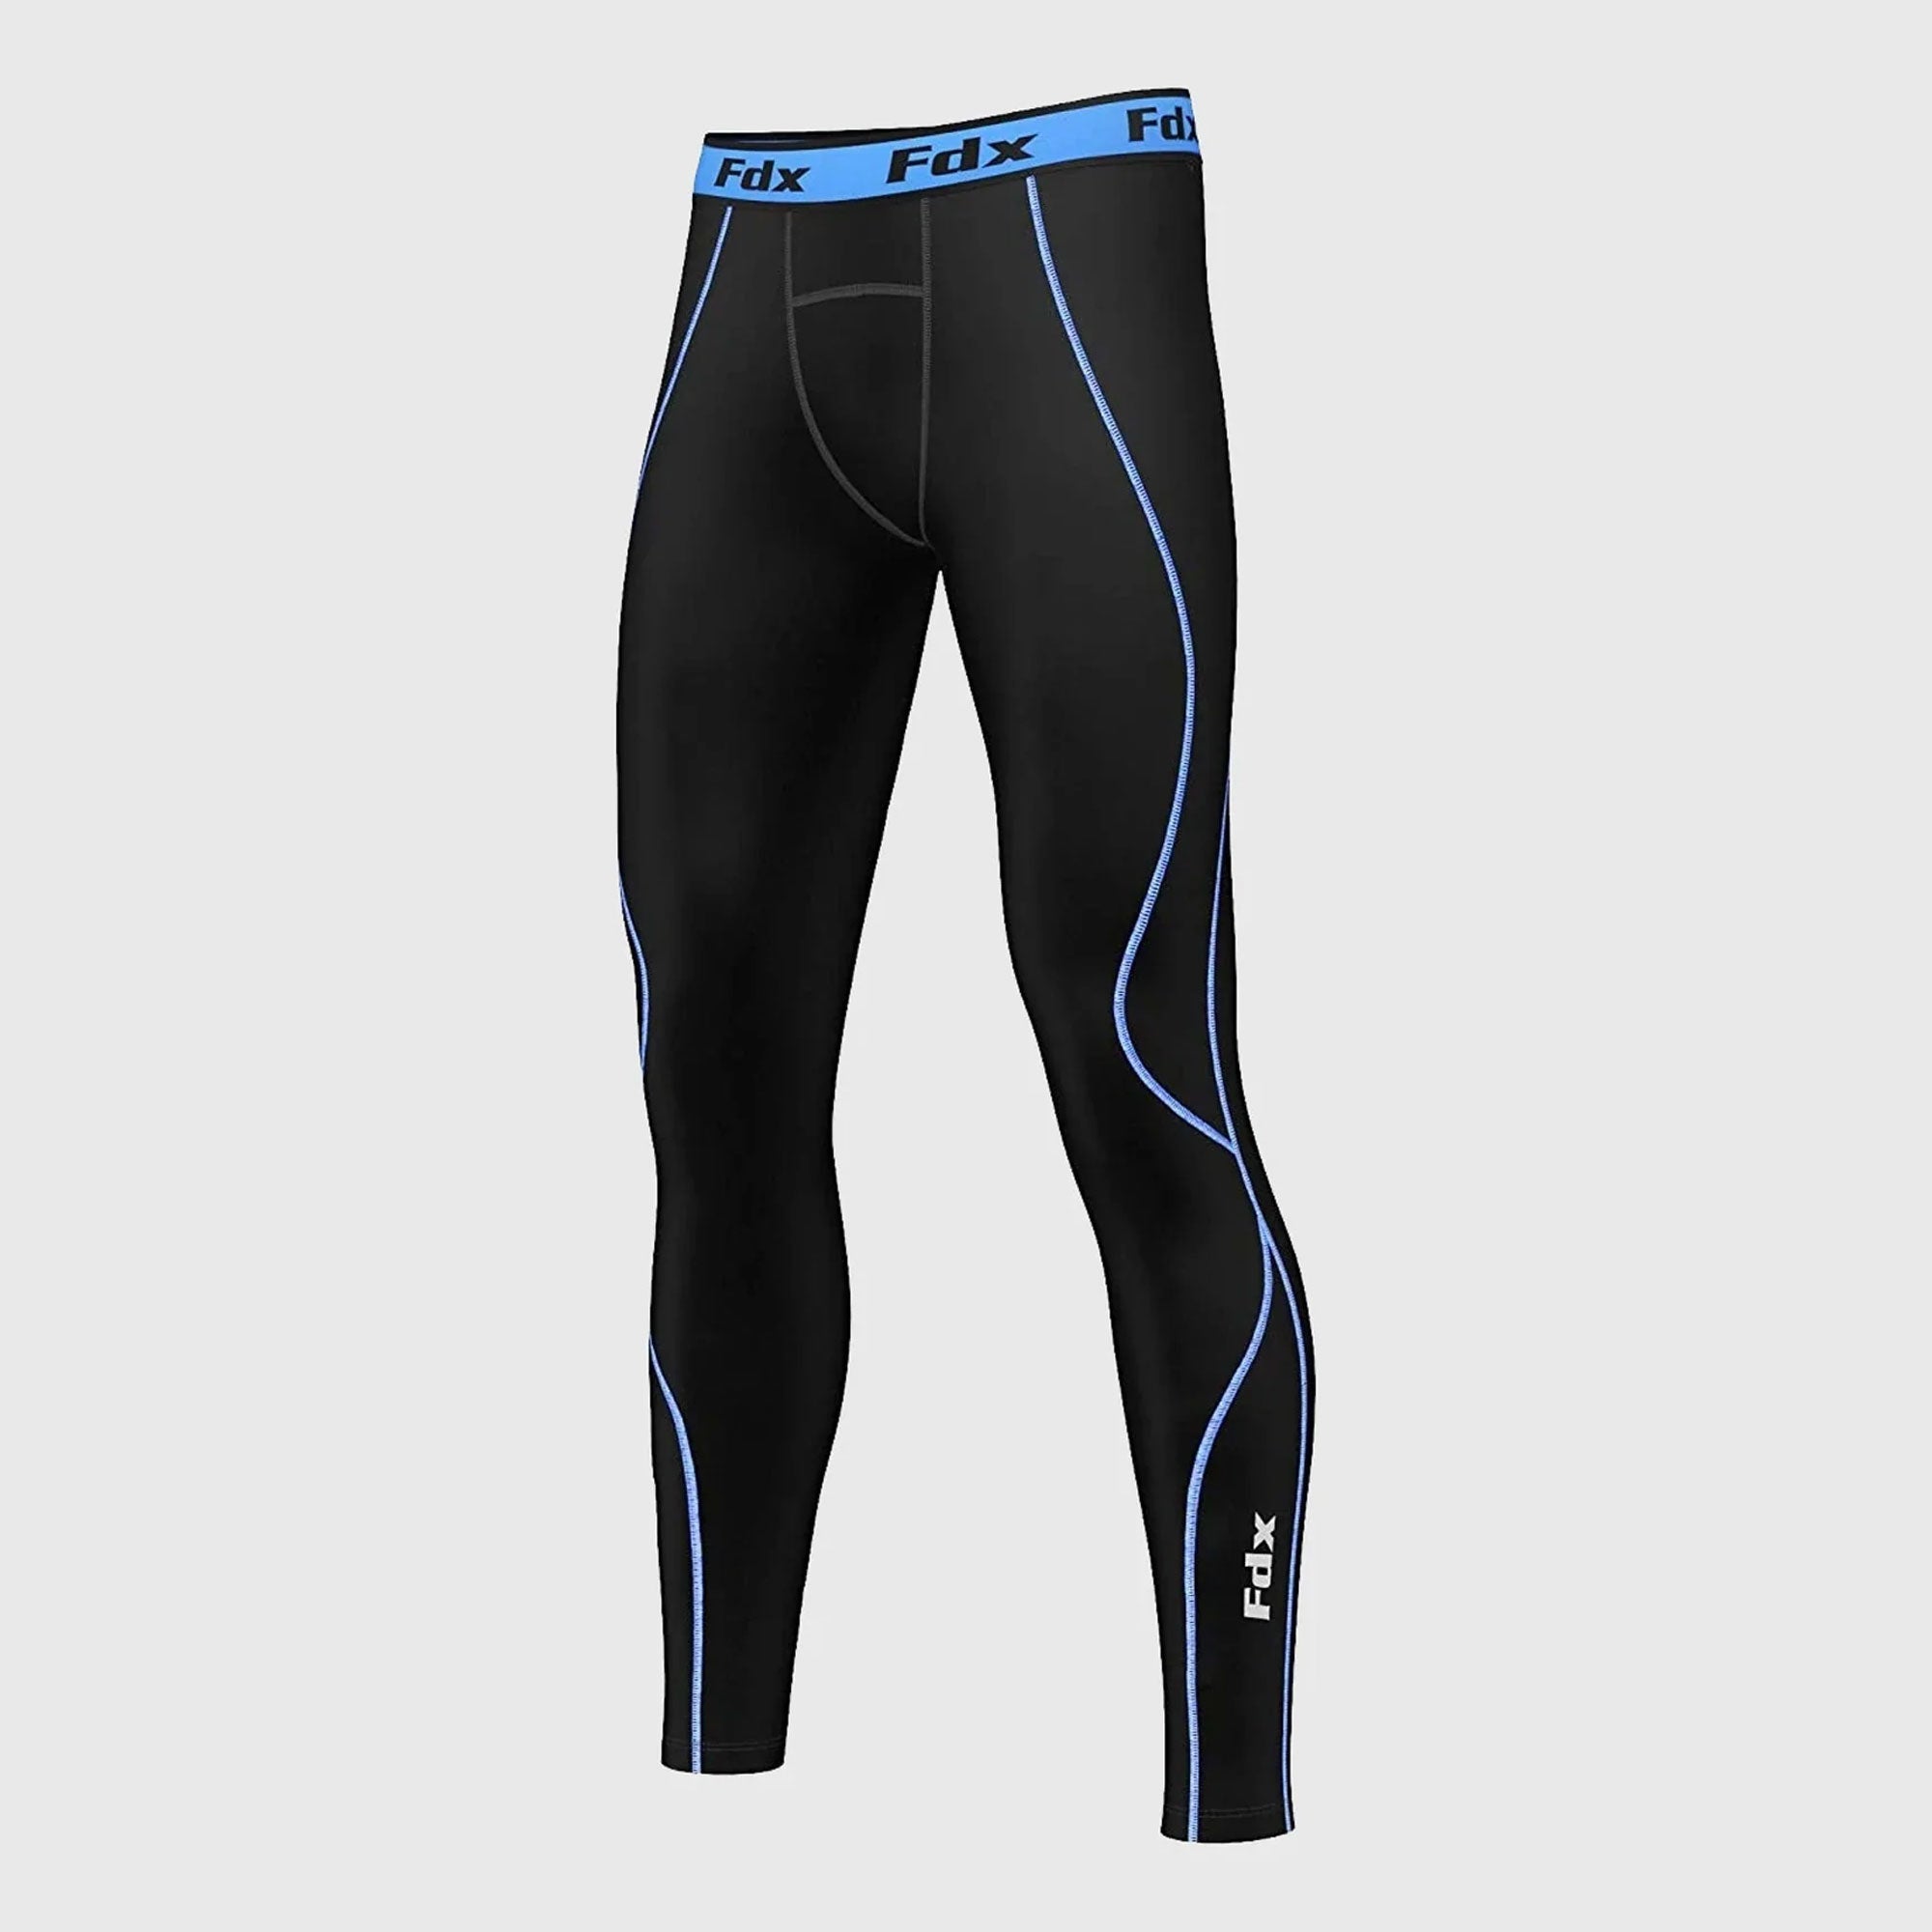 Related: Blue Men 2 Base Layer Tights